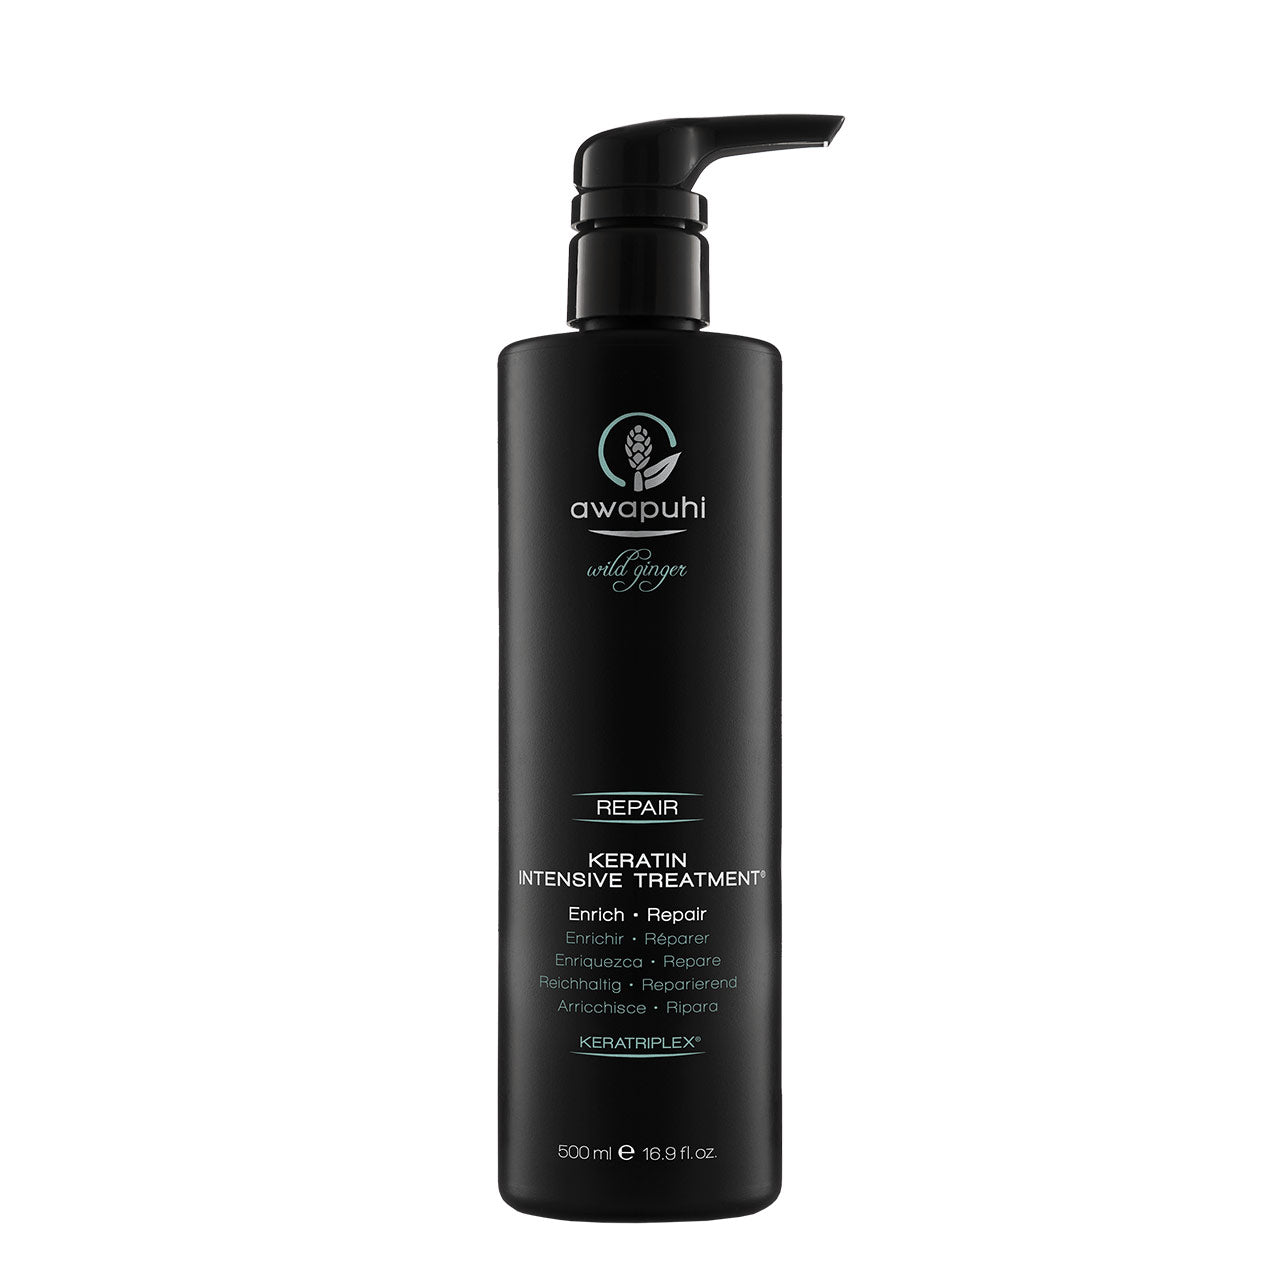 Awapuhi Wild Ginger Repair Keratin Intensive Treatment - 500ML - by Paul Mitchell |ProCare Outlet|